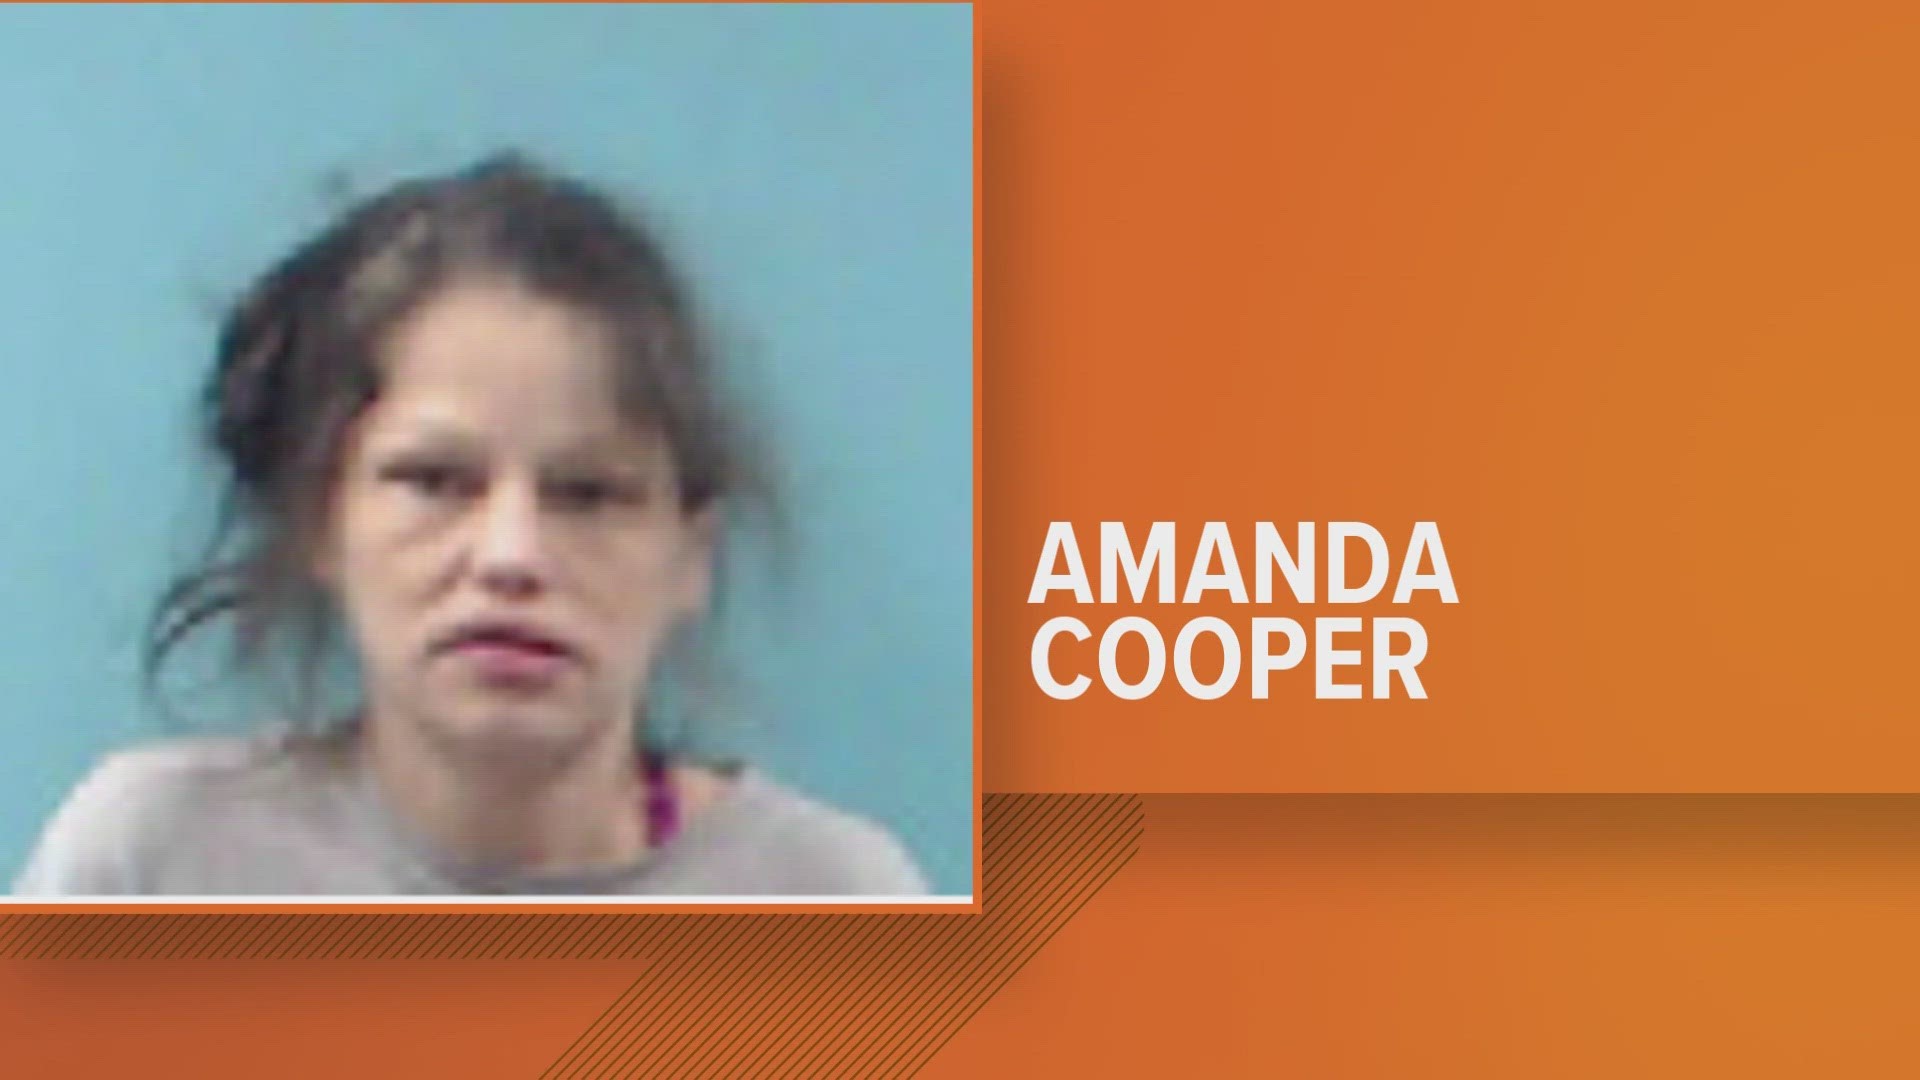 Amanda Cooper was arrested Saturday. She's being held in the Roane County Detention Center.